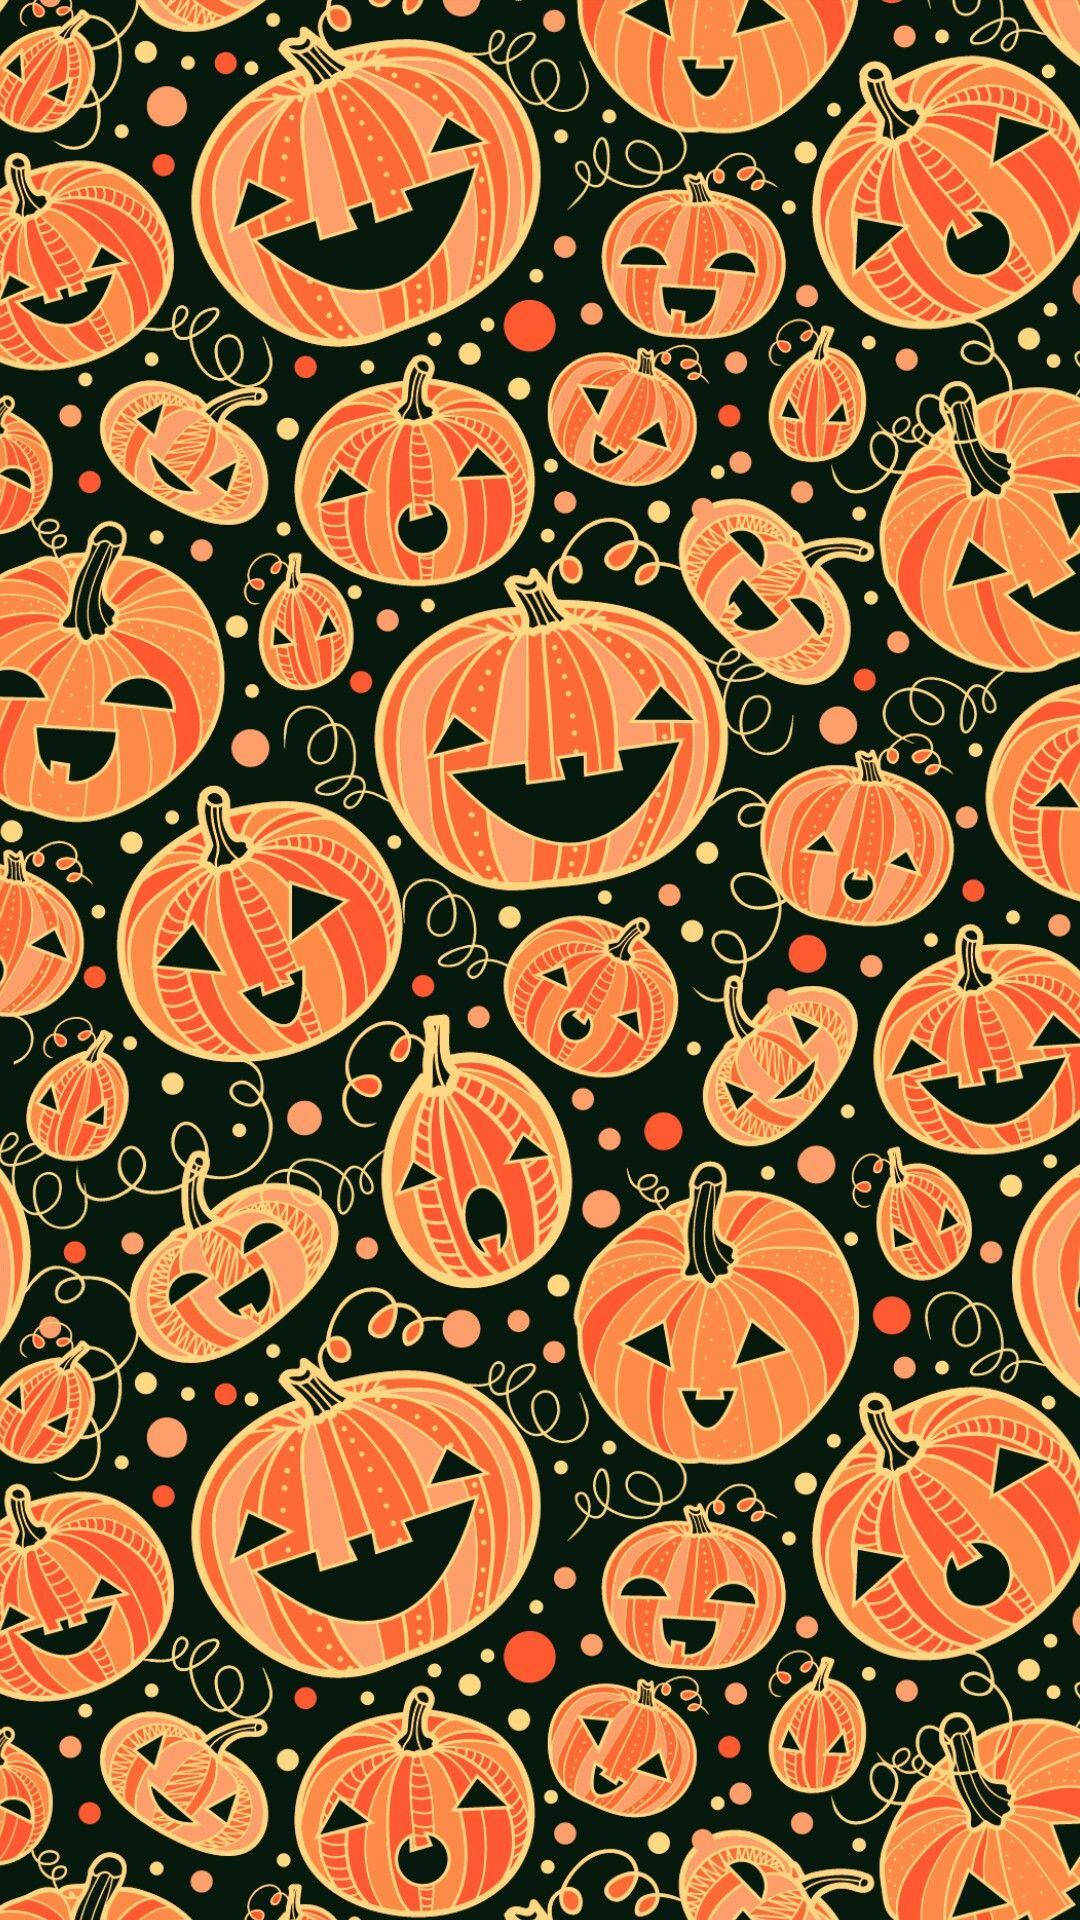 Magic and technology combine this Halloween with a spooky iPad. Wallpaper